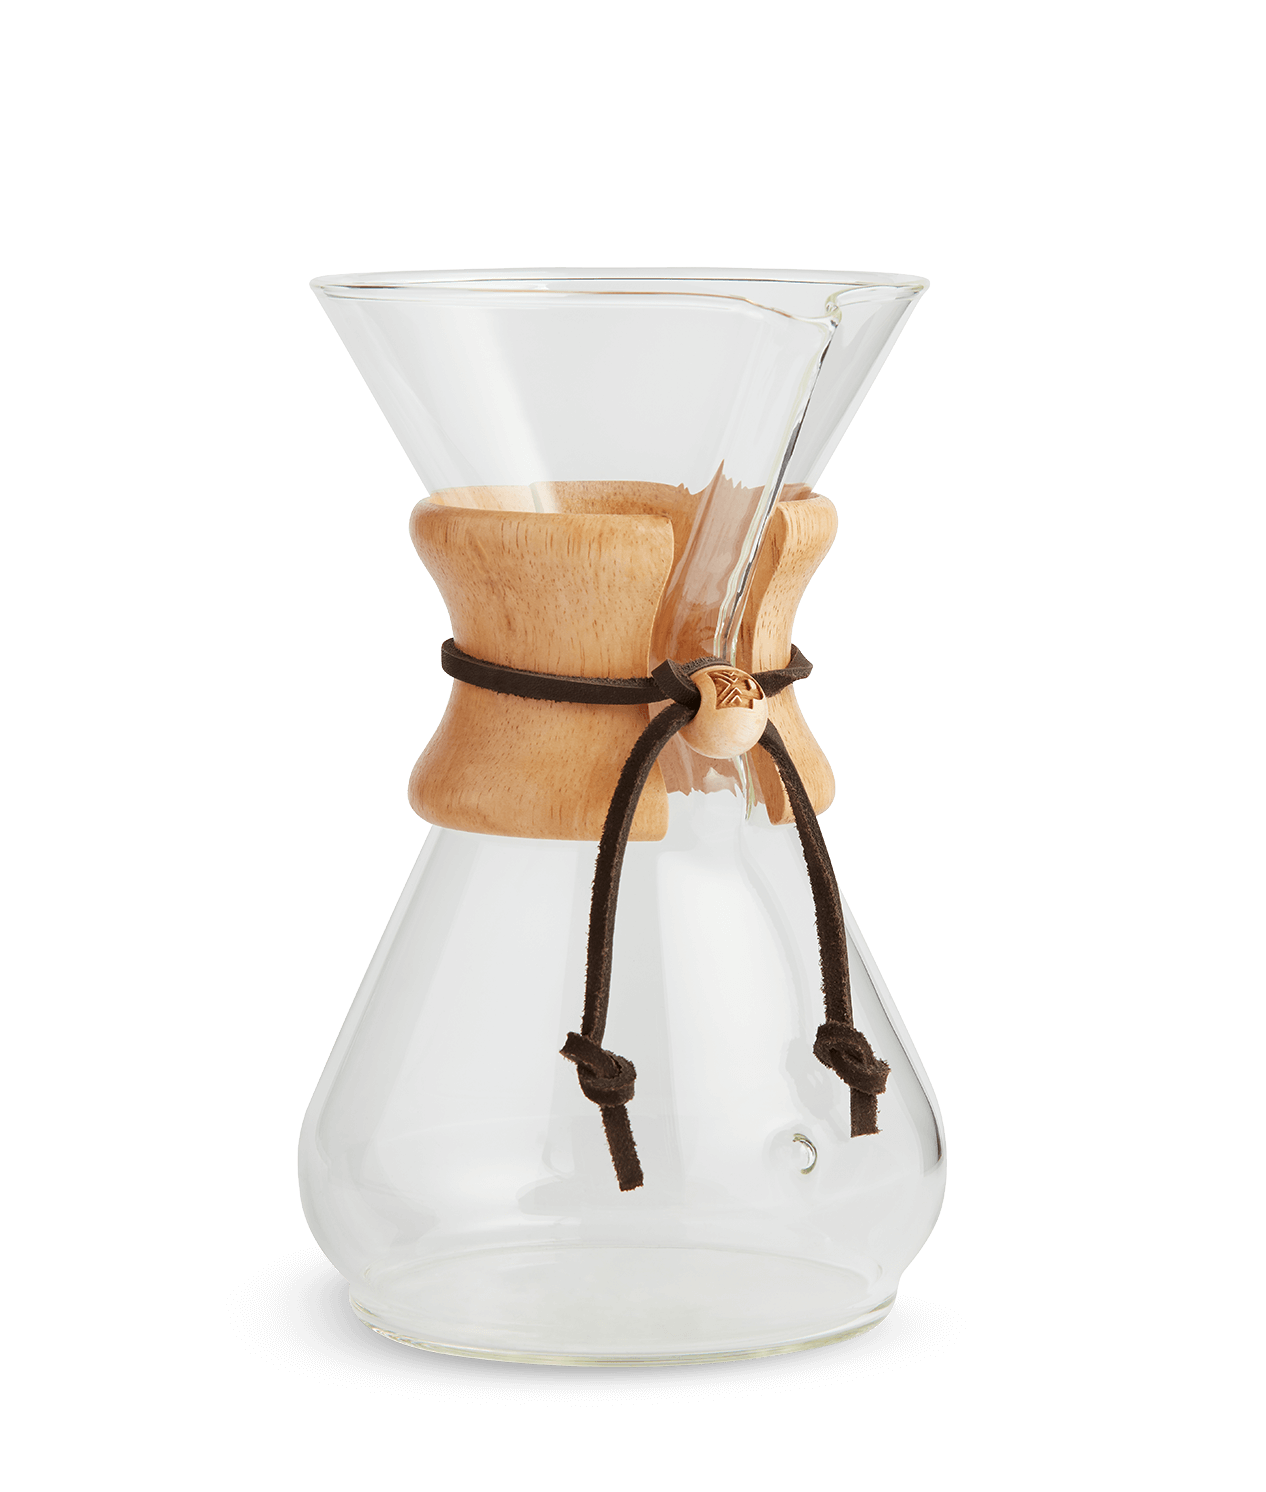 Kinto 4-Cup Pour Over Coffee Brewer with Stand